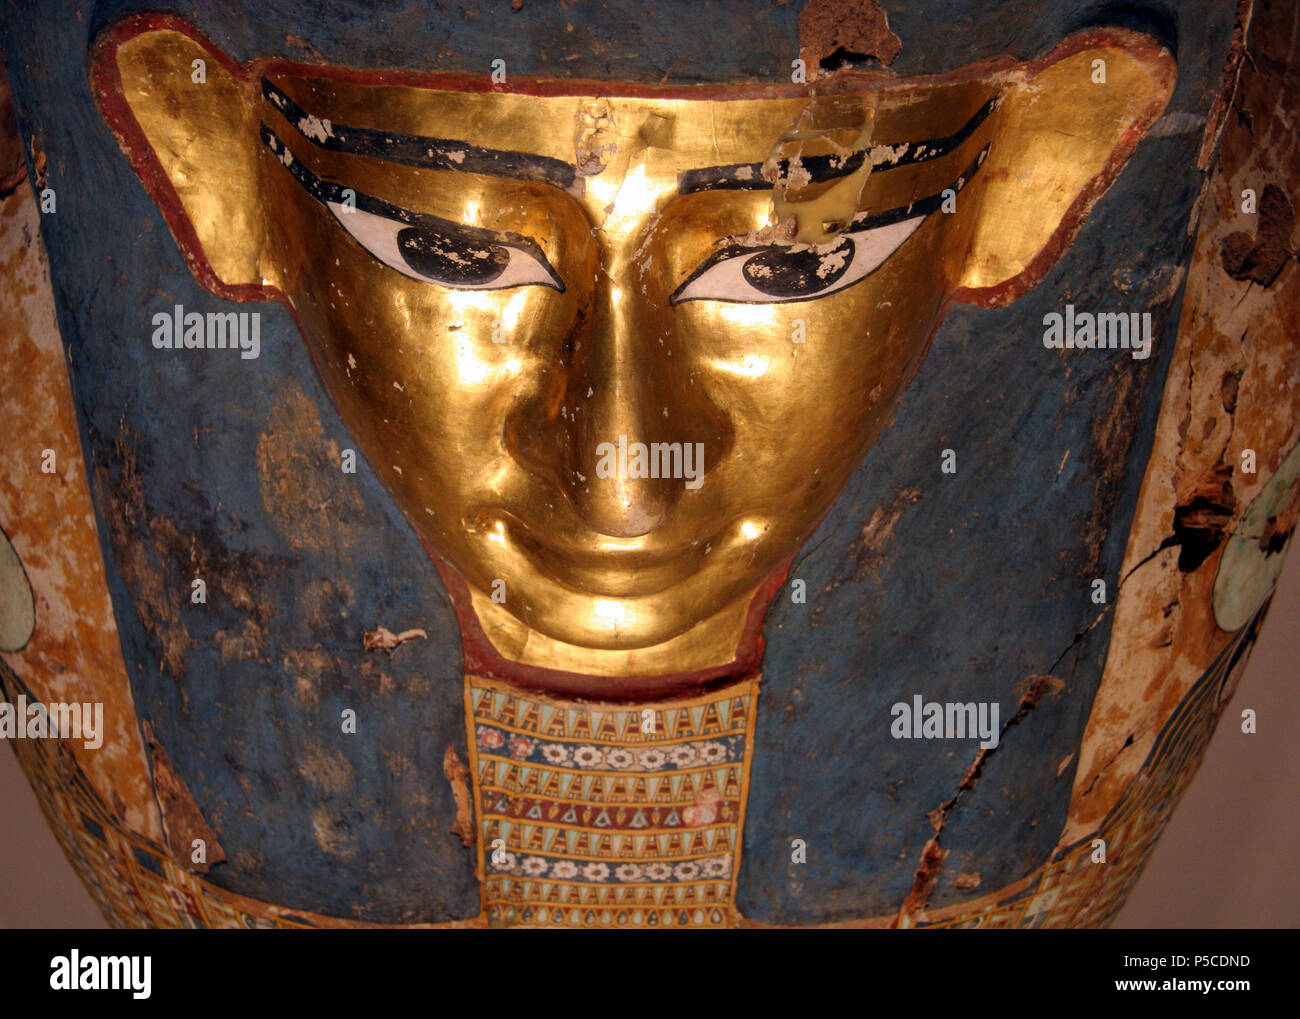 N/A. English: Face of the mummy coffin of Pedusiri, in plastered, polychromed, and gilded wood, Egyptian late dynastic or early Greco-Roman period, circa 500 - 250 B.C.E. Milwaukee Art Museum, Wisconsin 84 x 30 3/4 x 13 3/4 in. (213.36 x 78.11 x 34.93 cm) :Purchase M1967.20 [1] . 31 December 2011. Jonathunder 544 FacePedusiri Stock Photo